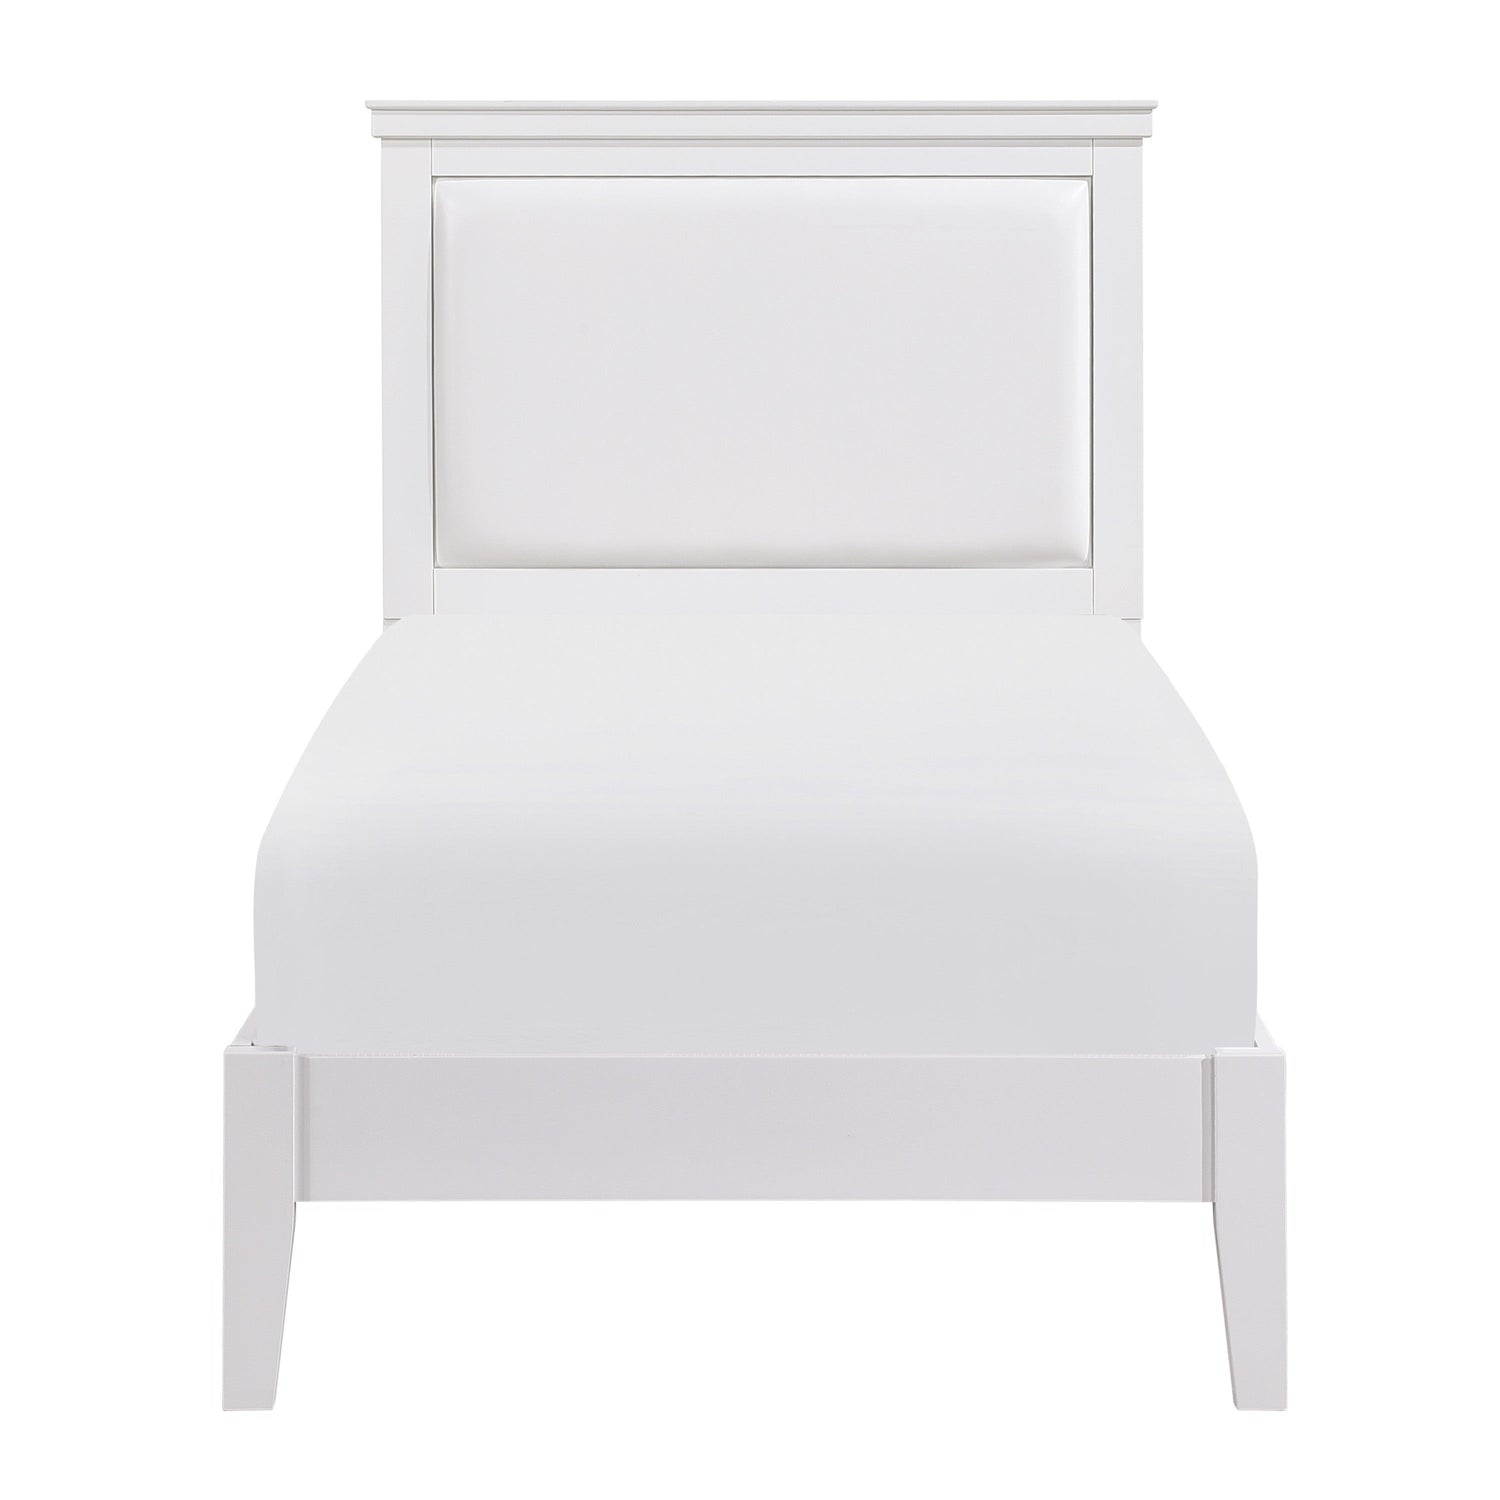 Seabright White Twin Bed - SET | 1519WHT-1 | 1519WHT-3 - Bien Home Furniture &amp; Electronics